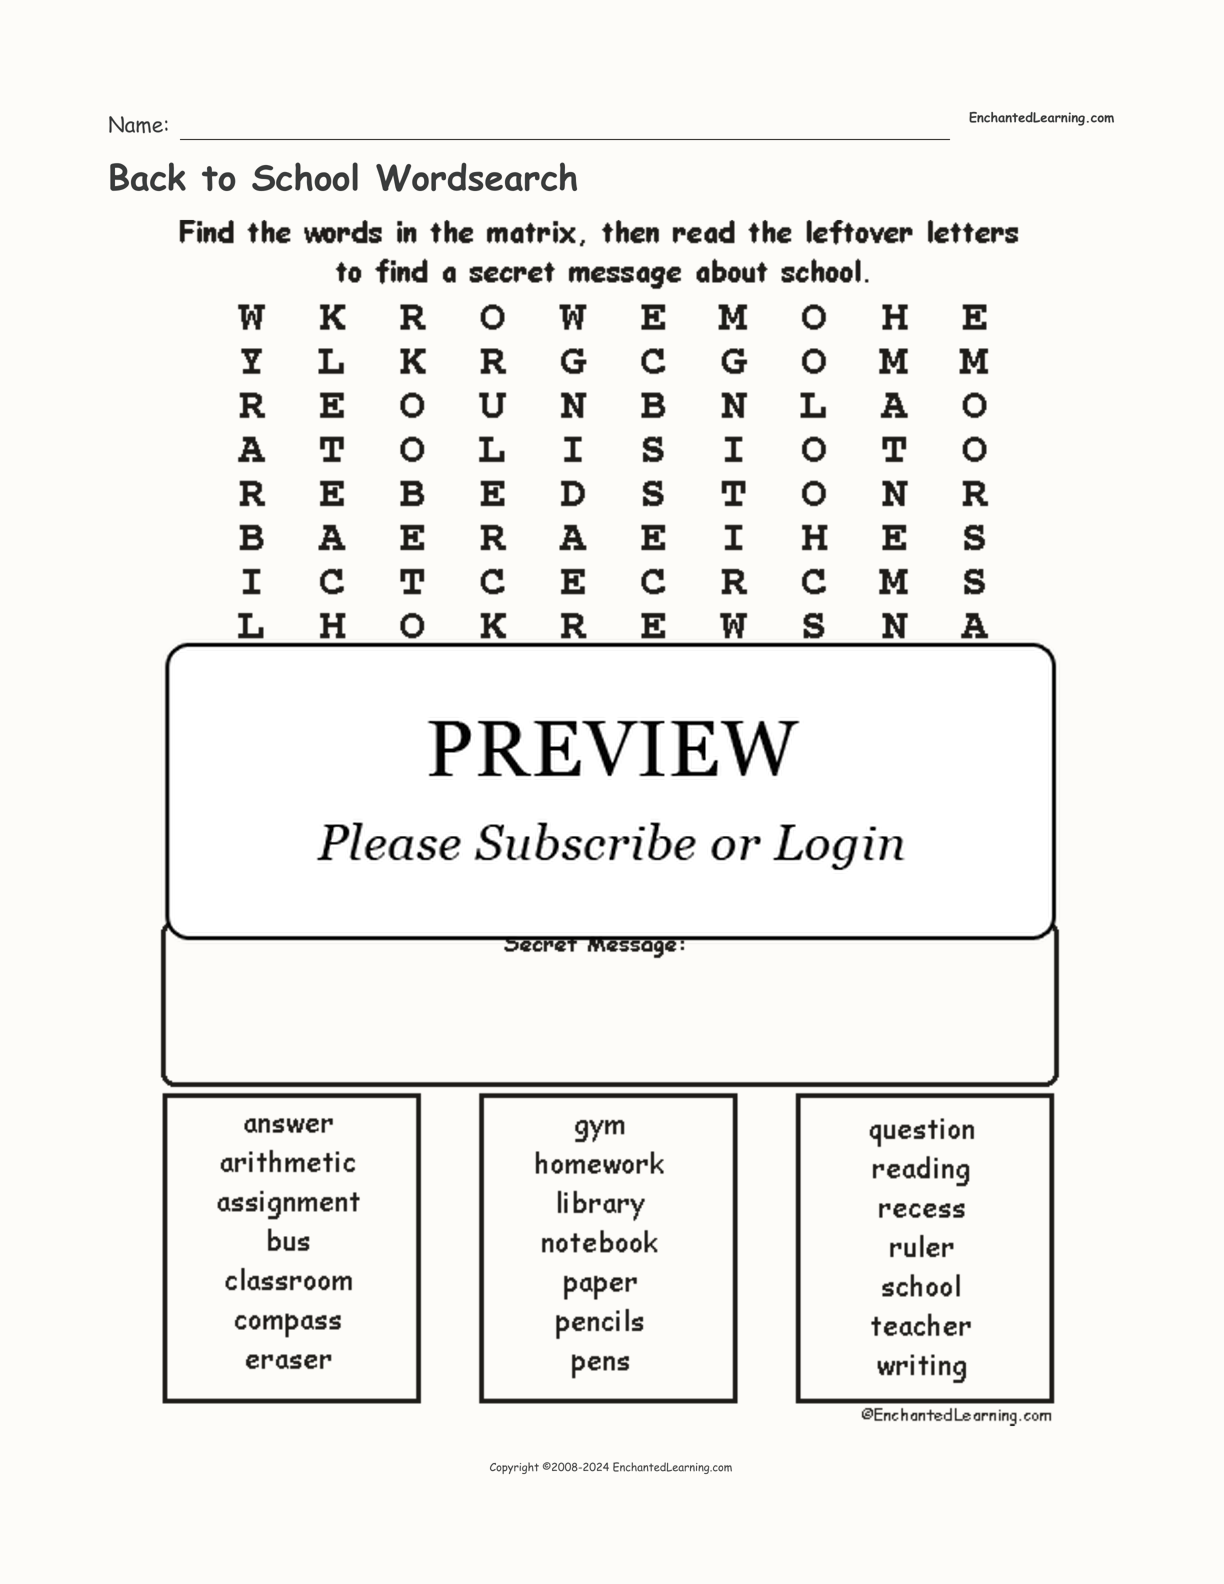 Back to School Wordsearch interactive worksheet page 1